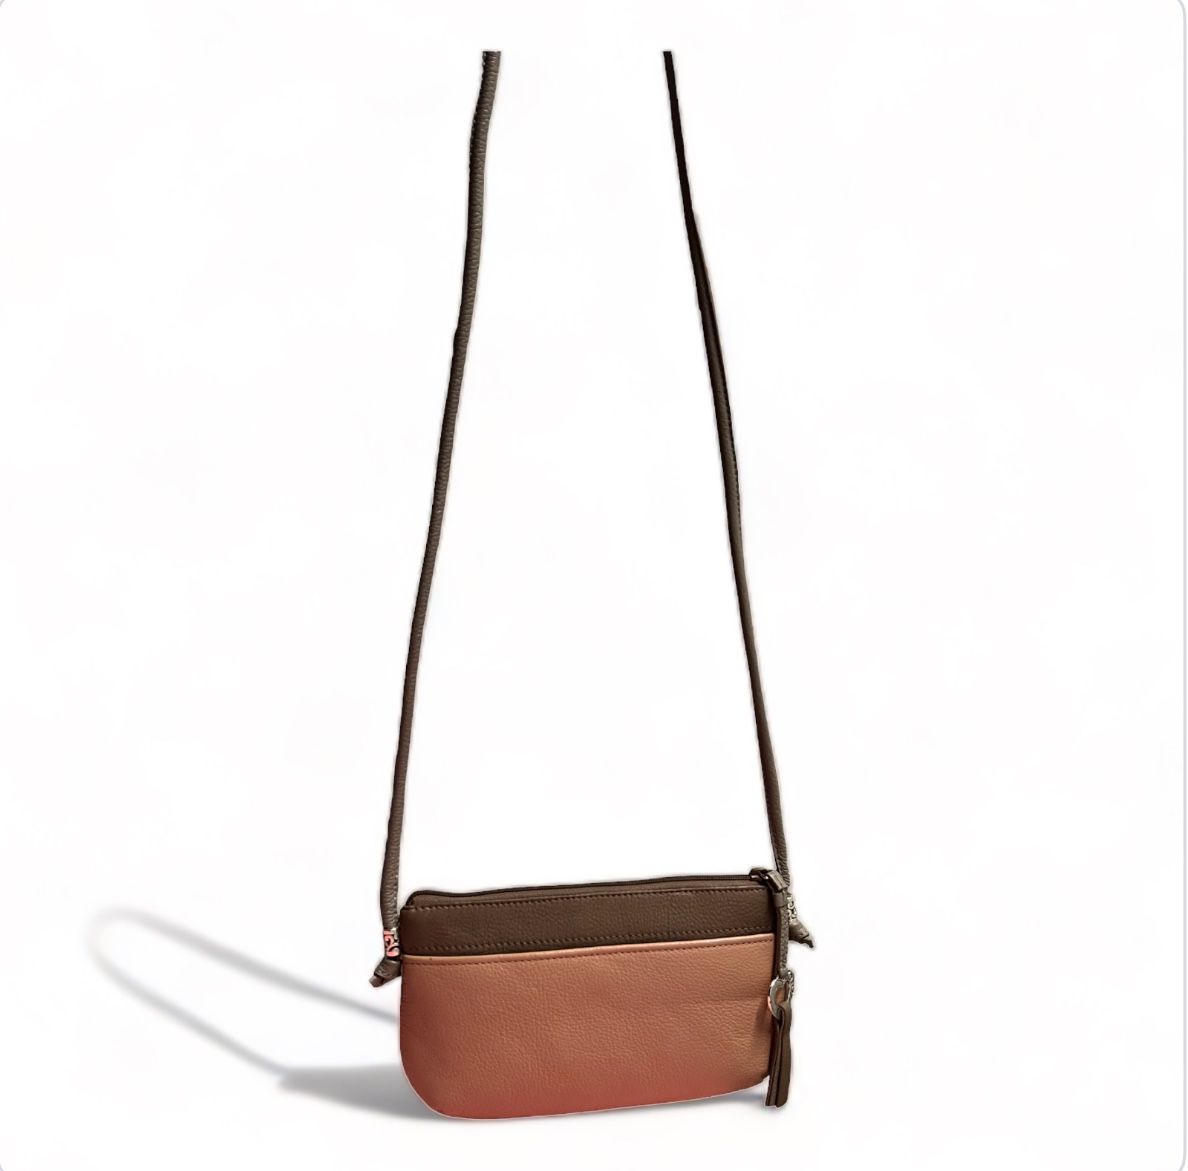 Brighton Zip Wallet brown Clutch Crossbody with one very small issue